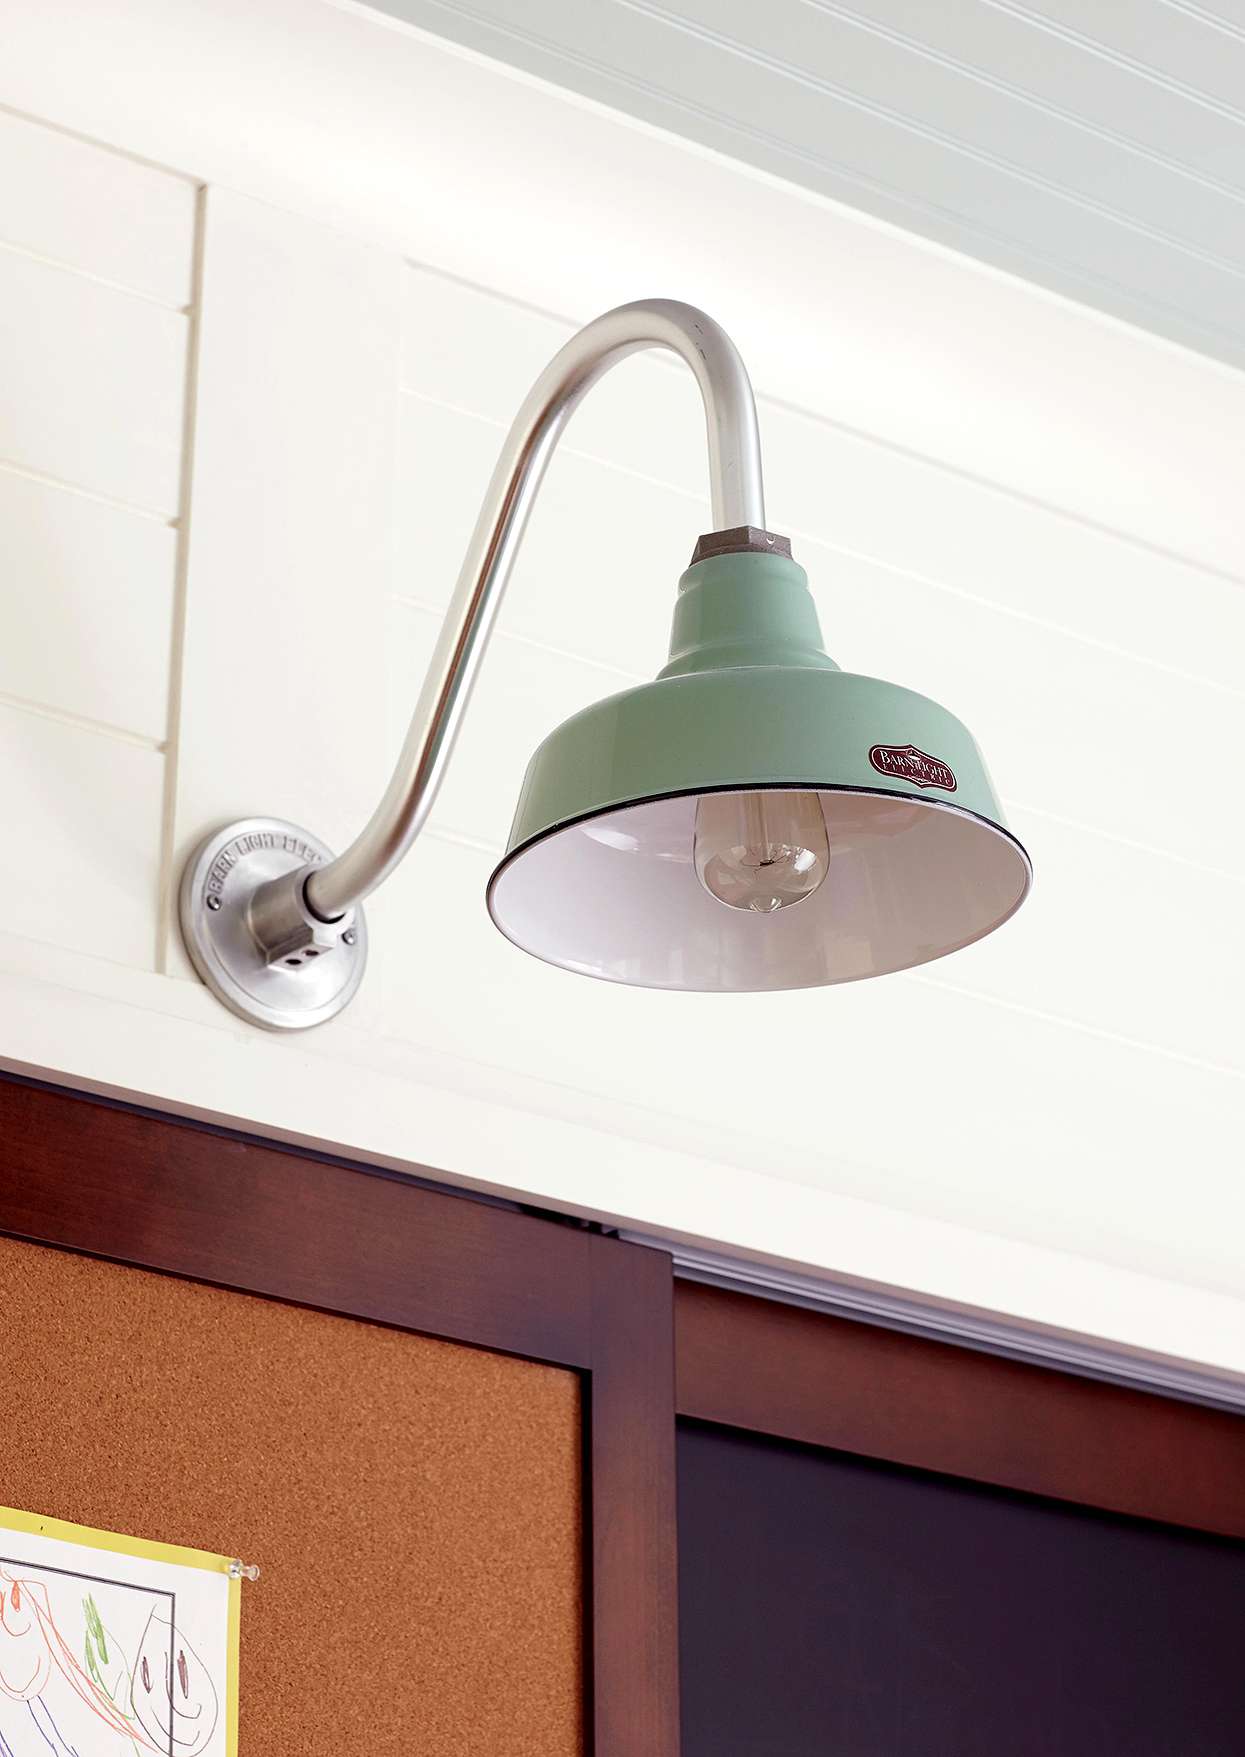 Spring Cleaning Checklist and To-Dos: Dust Light Fixtures